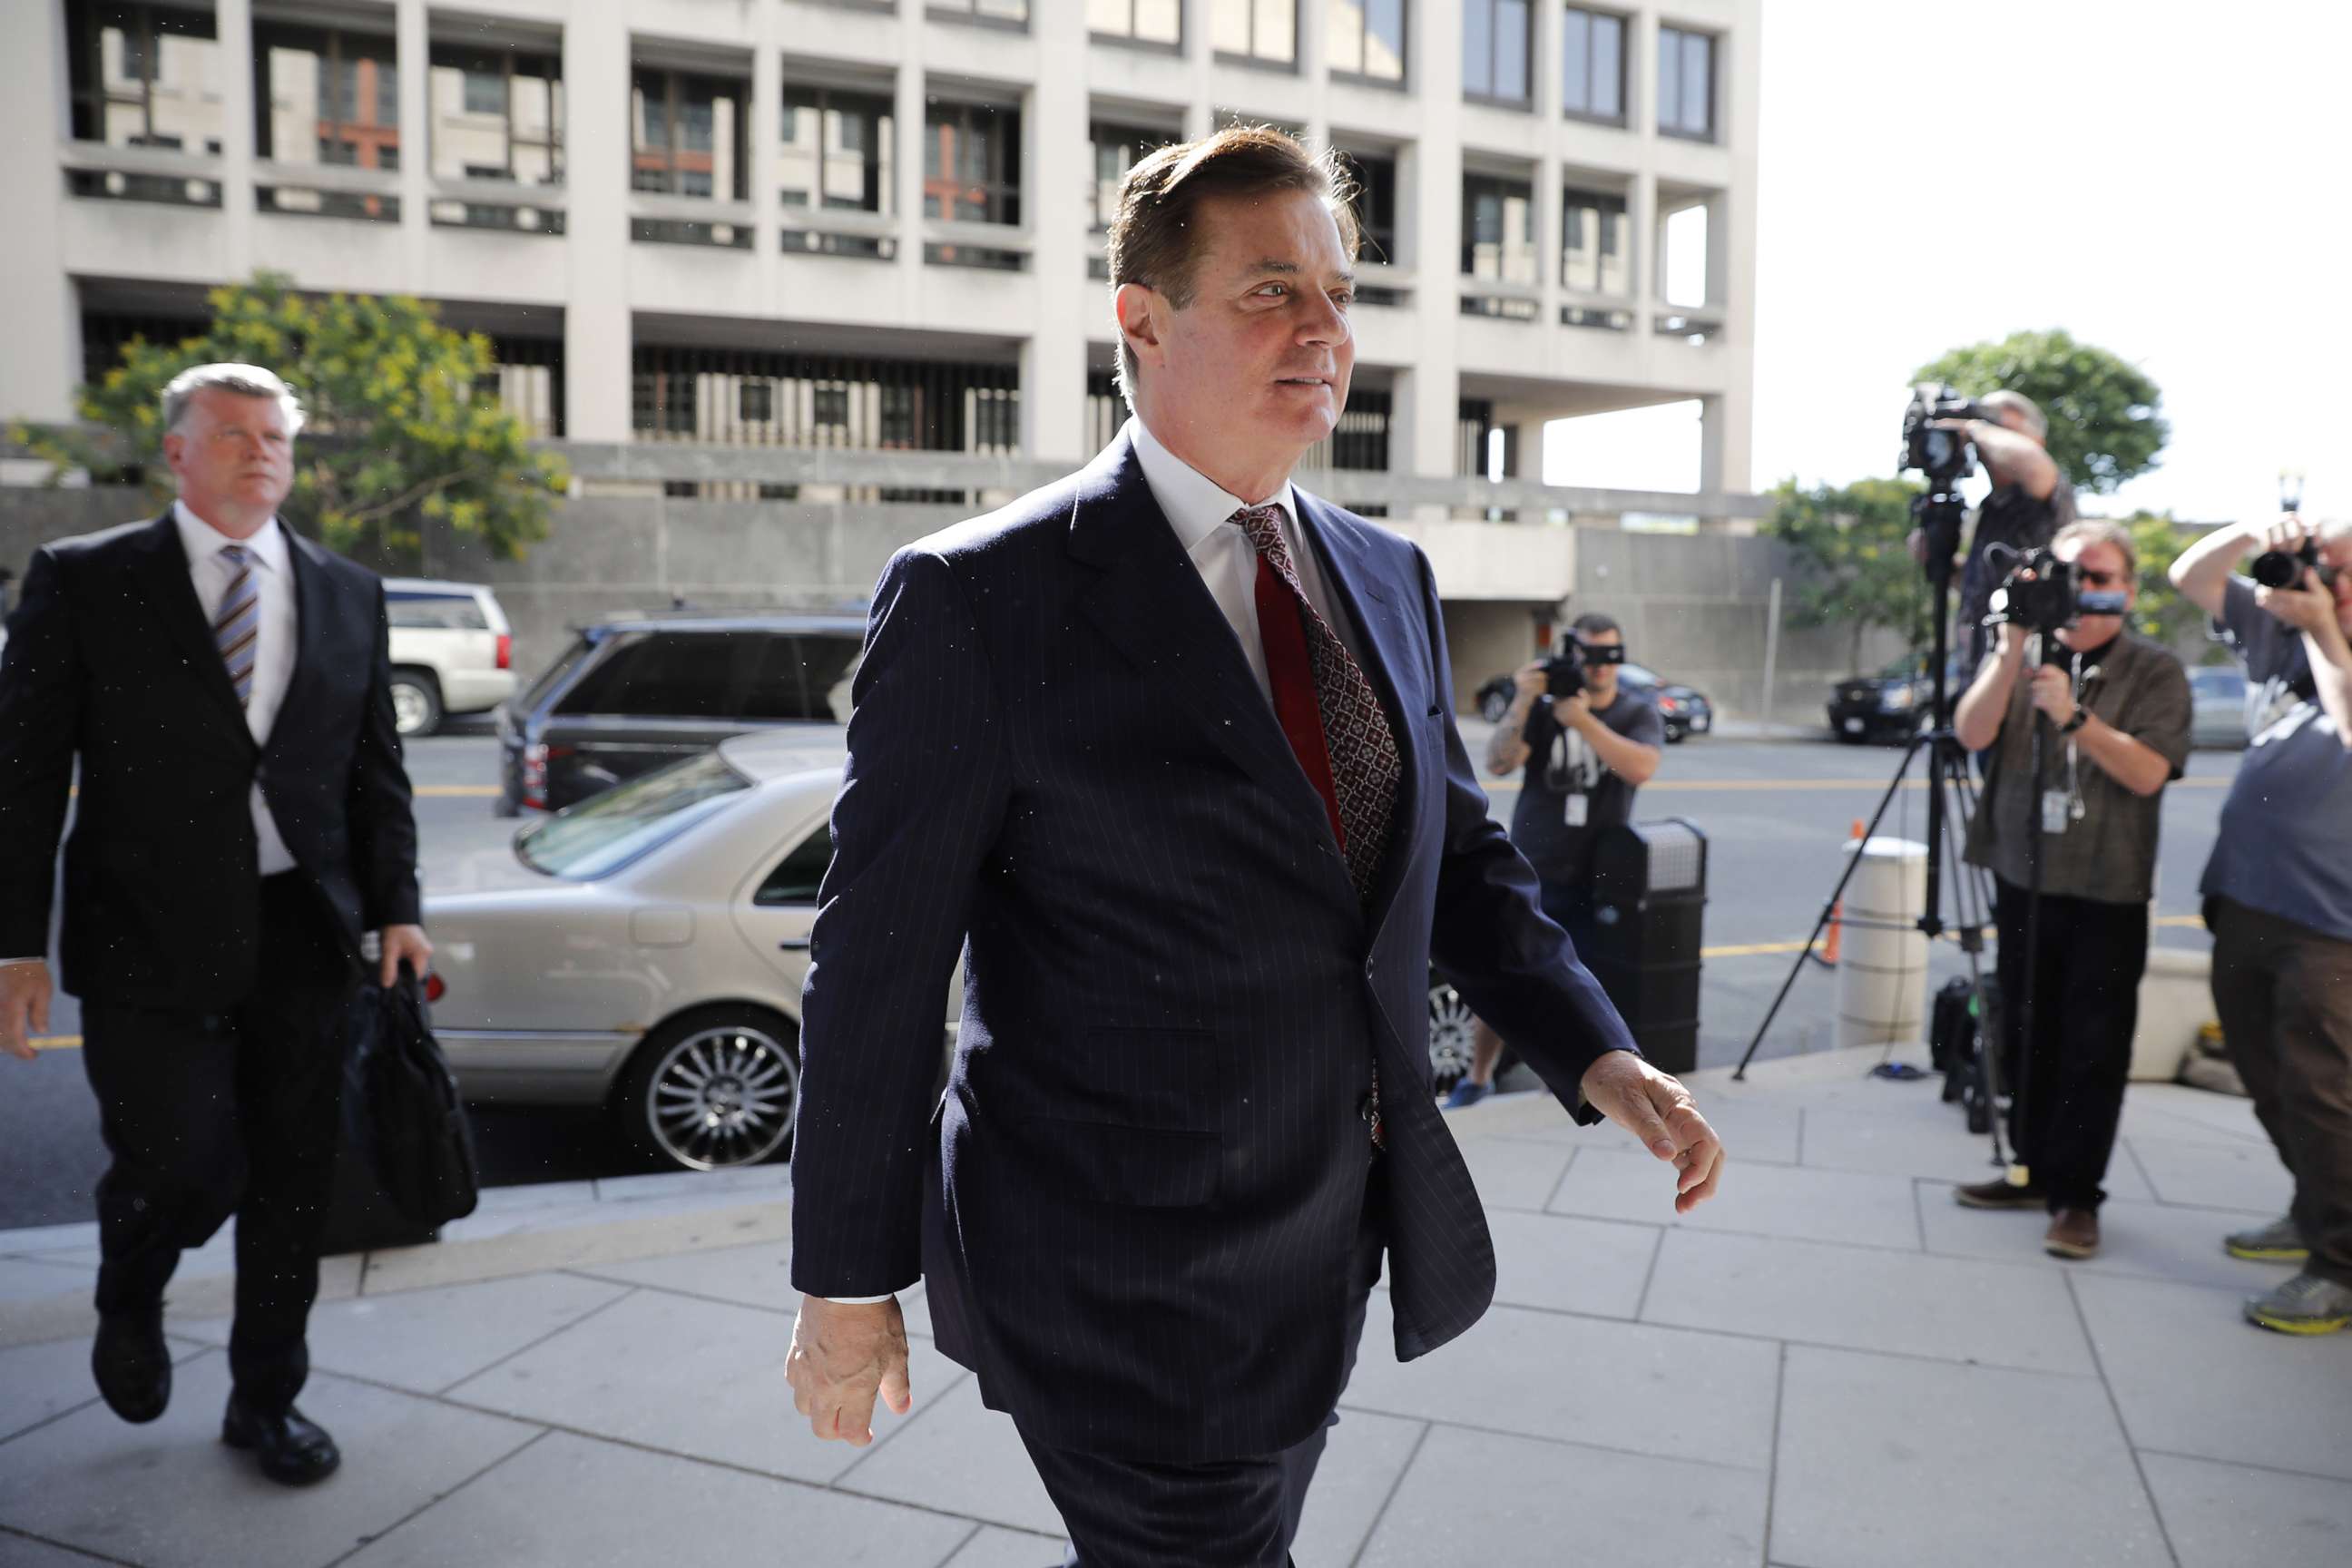 PHOTO: Paul Manafort, former campaign manager for Donald Trump, arrives at federal court in Washington, June 15, 2018.